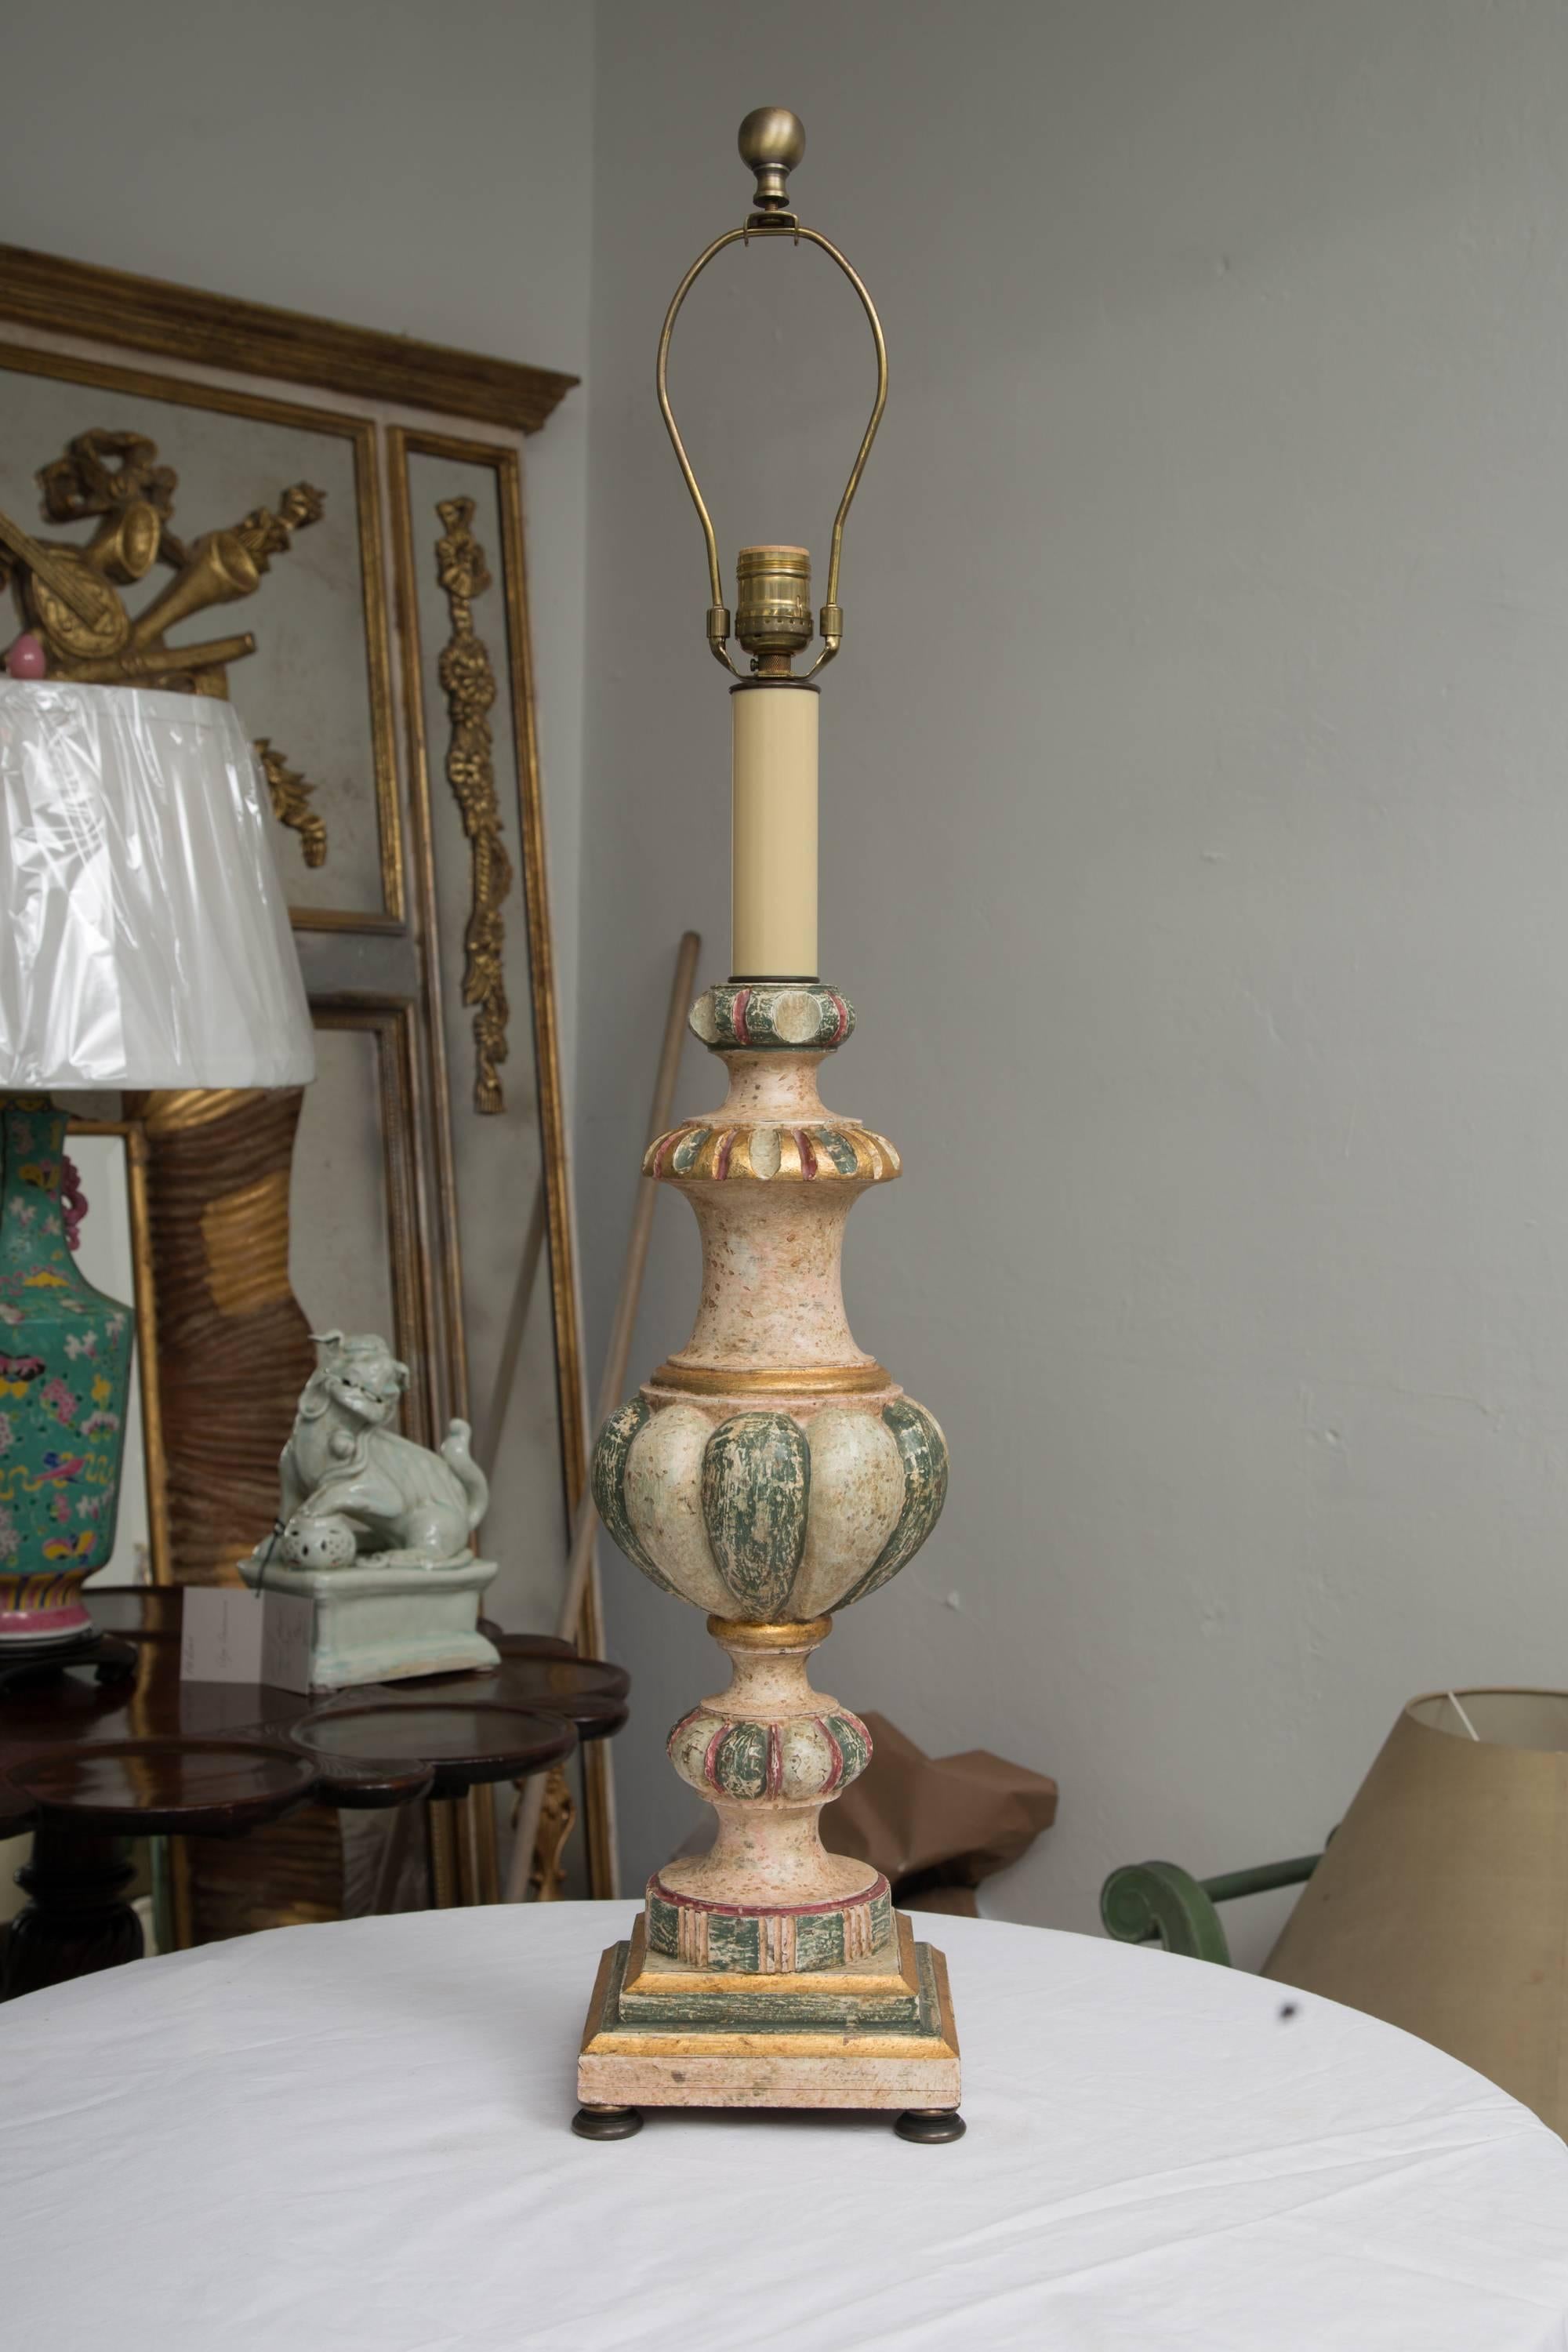 20th Century Pair of Polychromed Italian Architectural Elements as Lamps